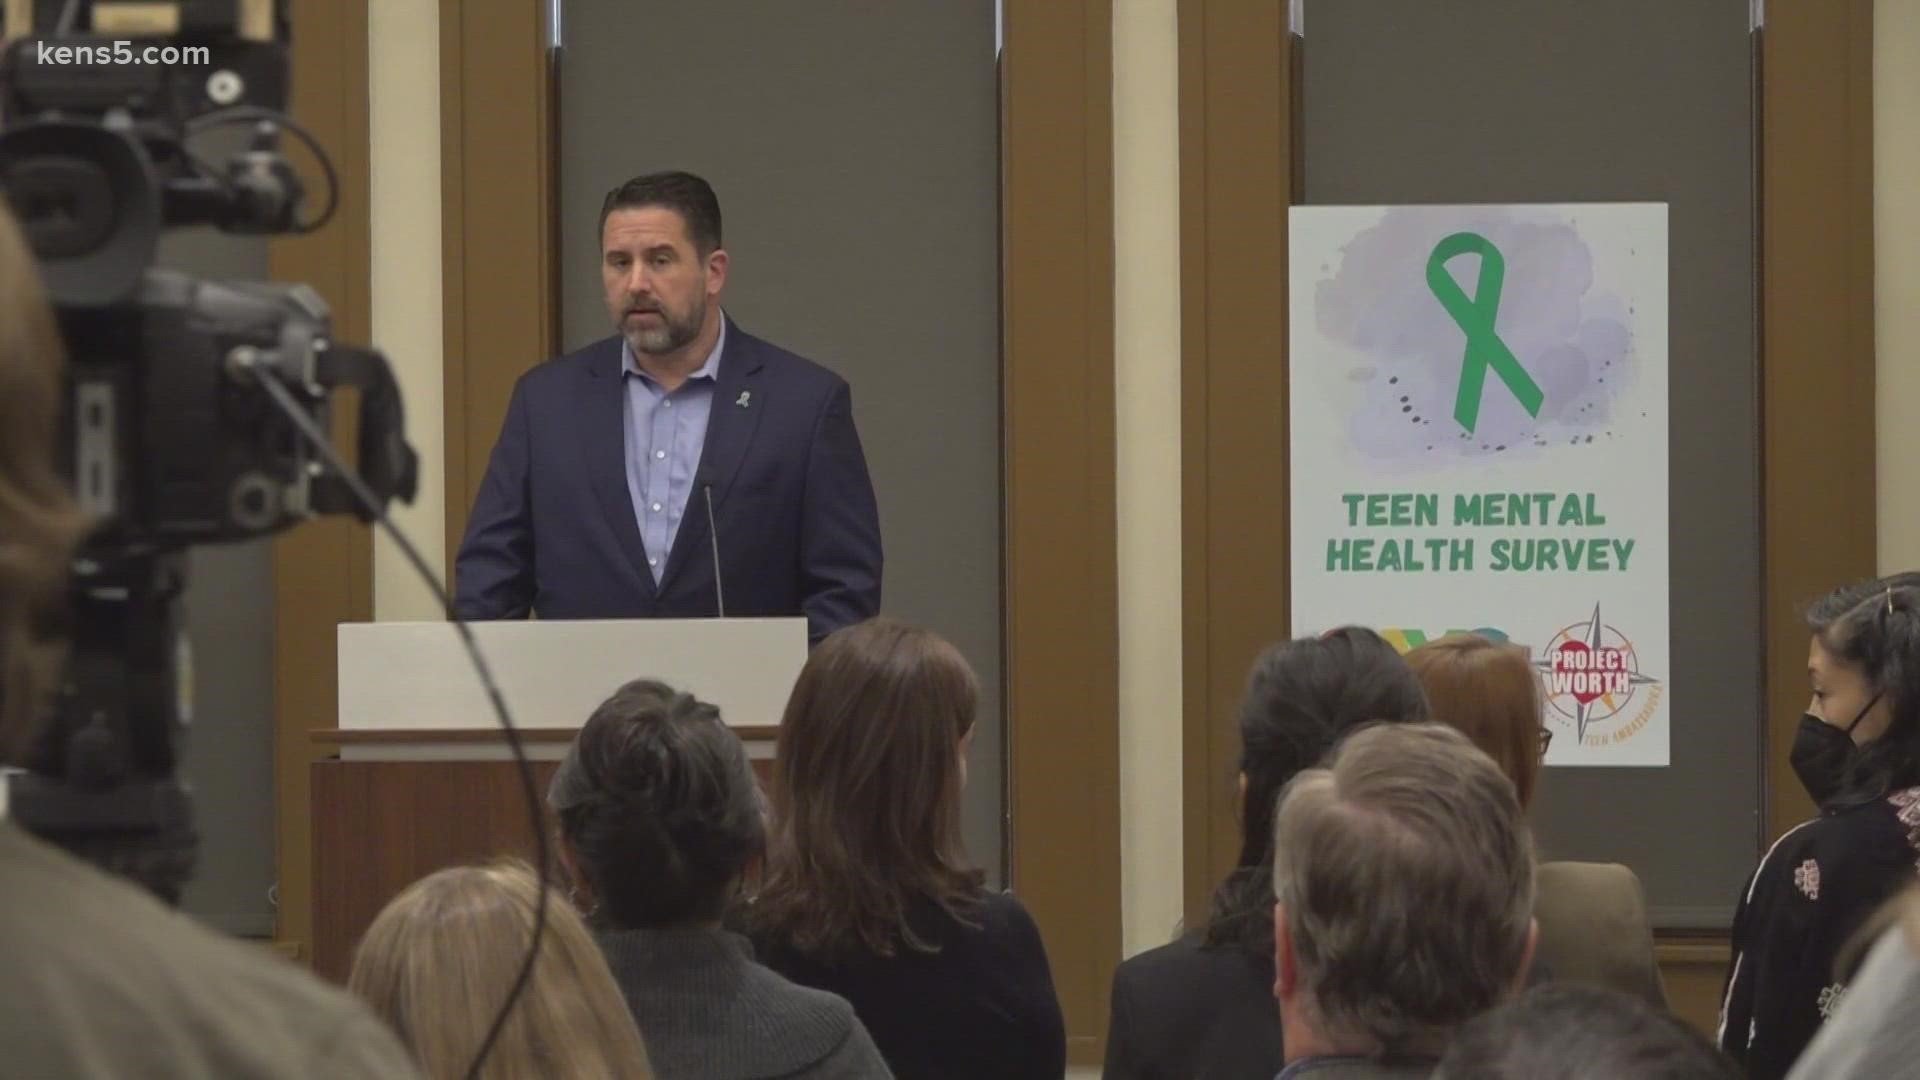 The San Antonio Youth Commission and Project Worth Teen Ambassadors created the survey to begin addressing mental health needs of their communities.